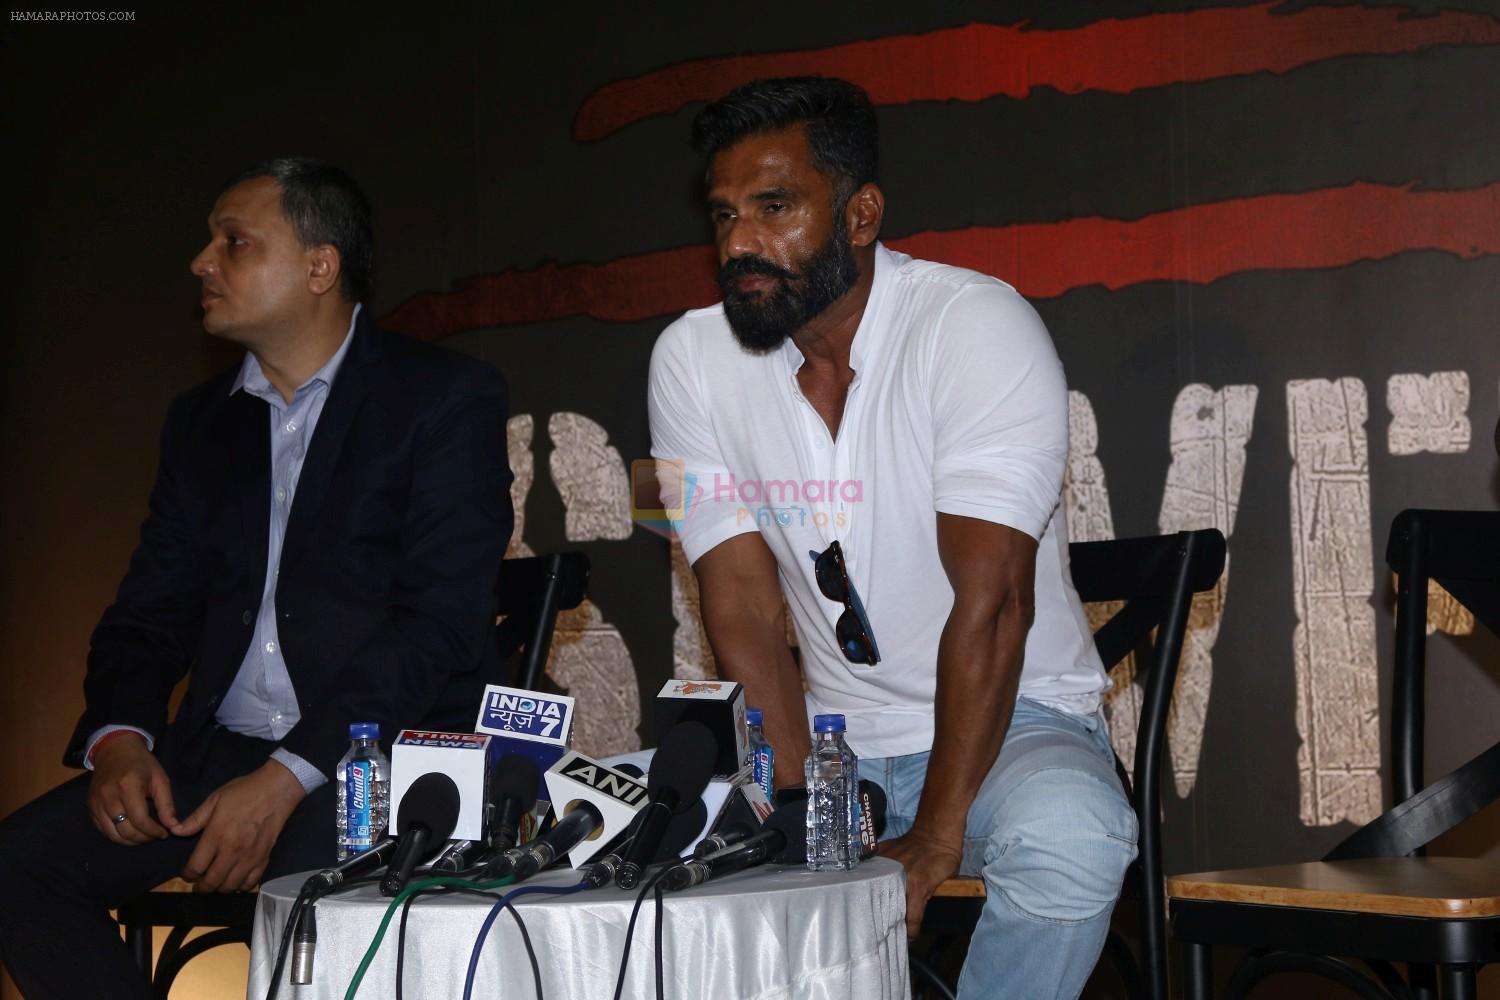 Suniel Shetty Launch Of Smaaash Shivfit on 17th May 2017